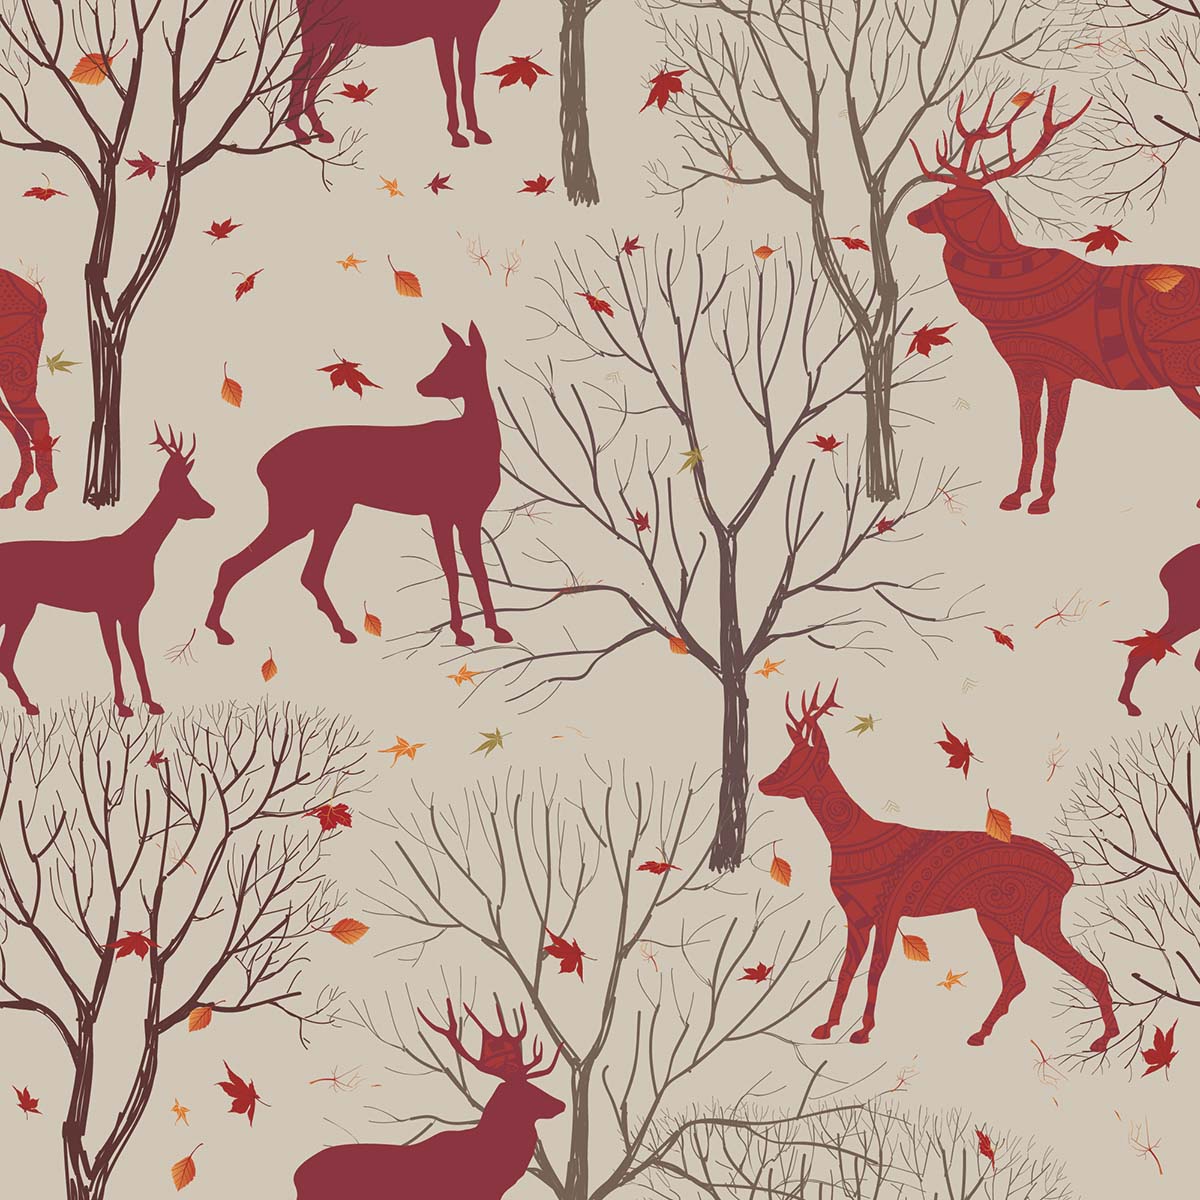 A pattern of deer and trees